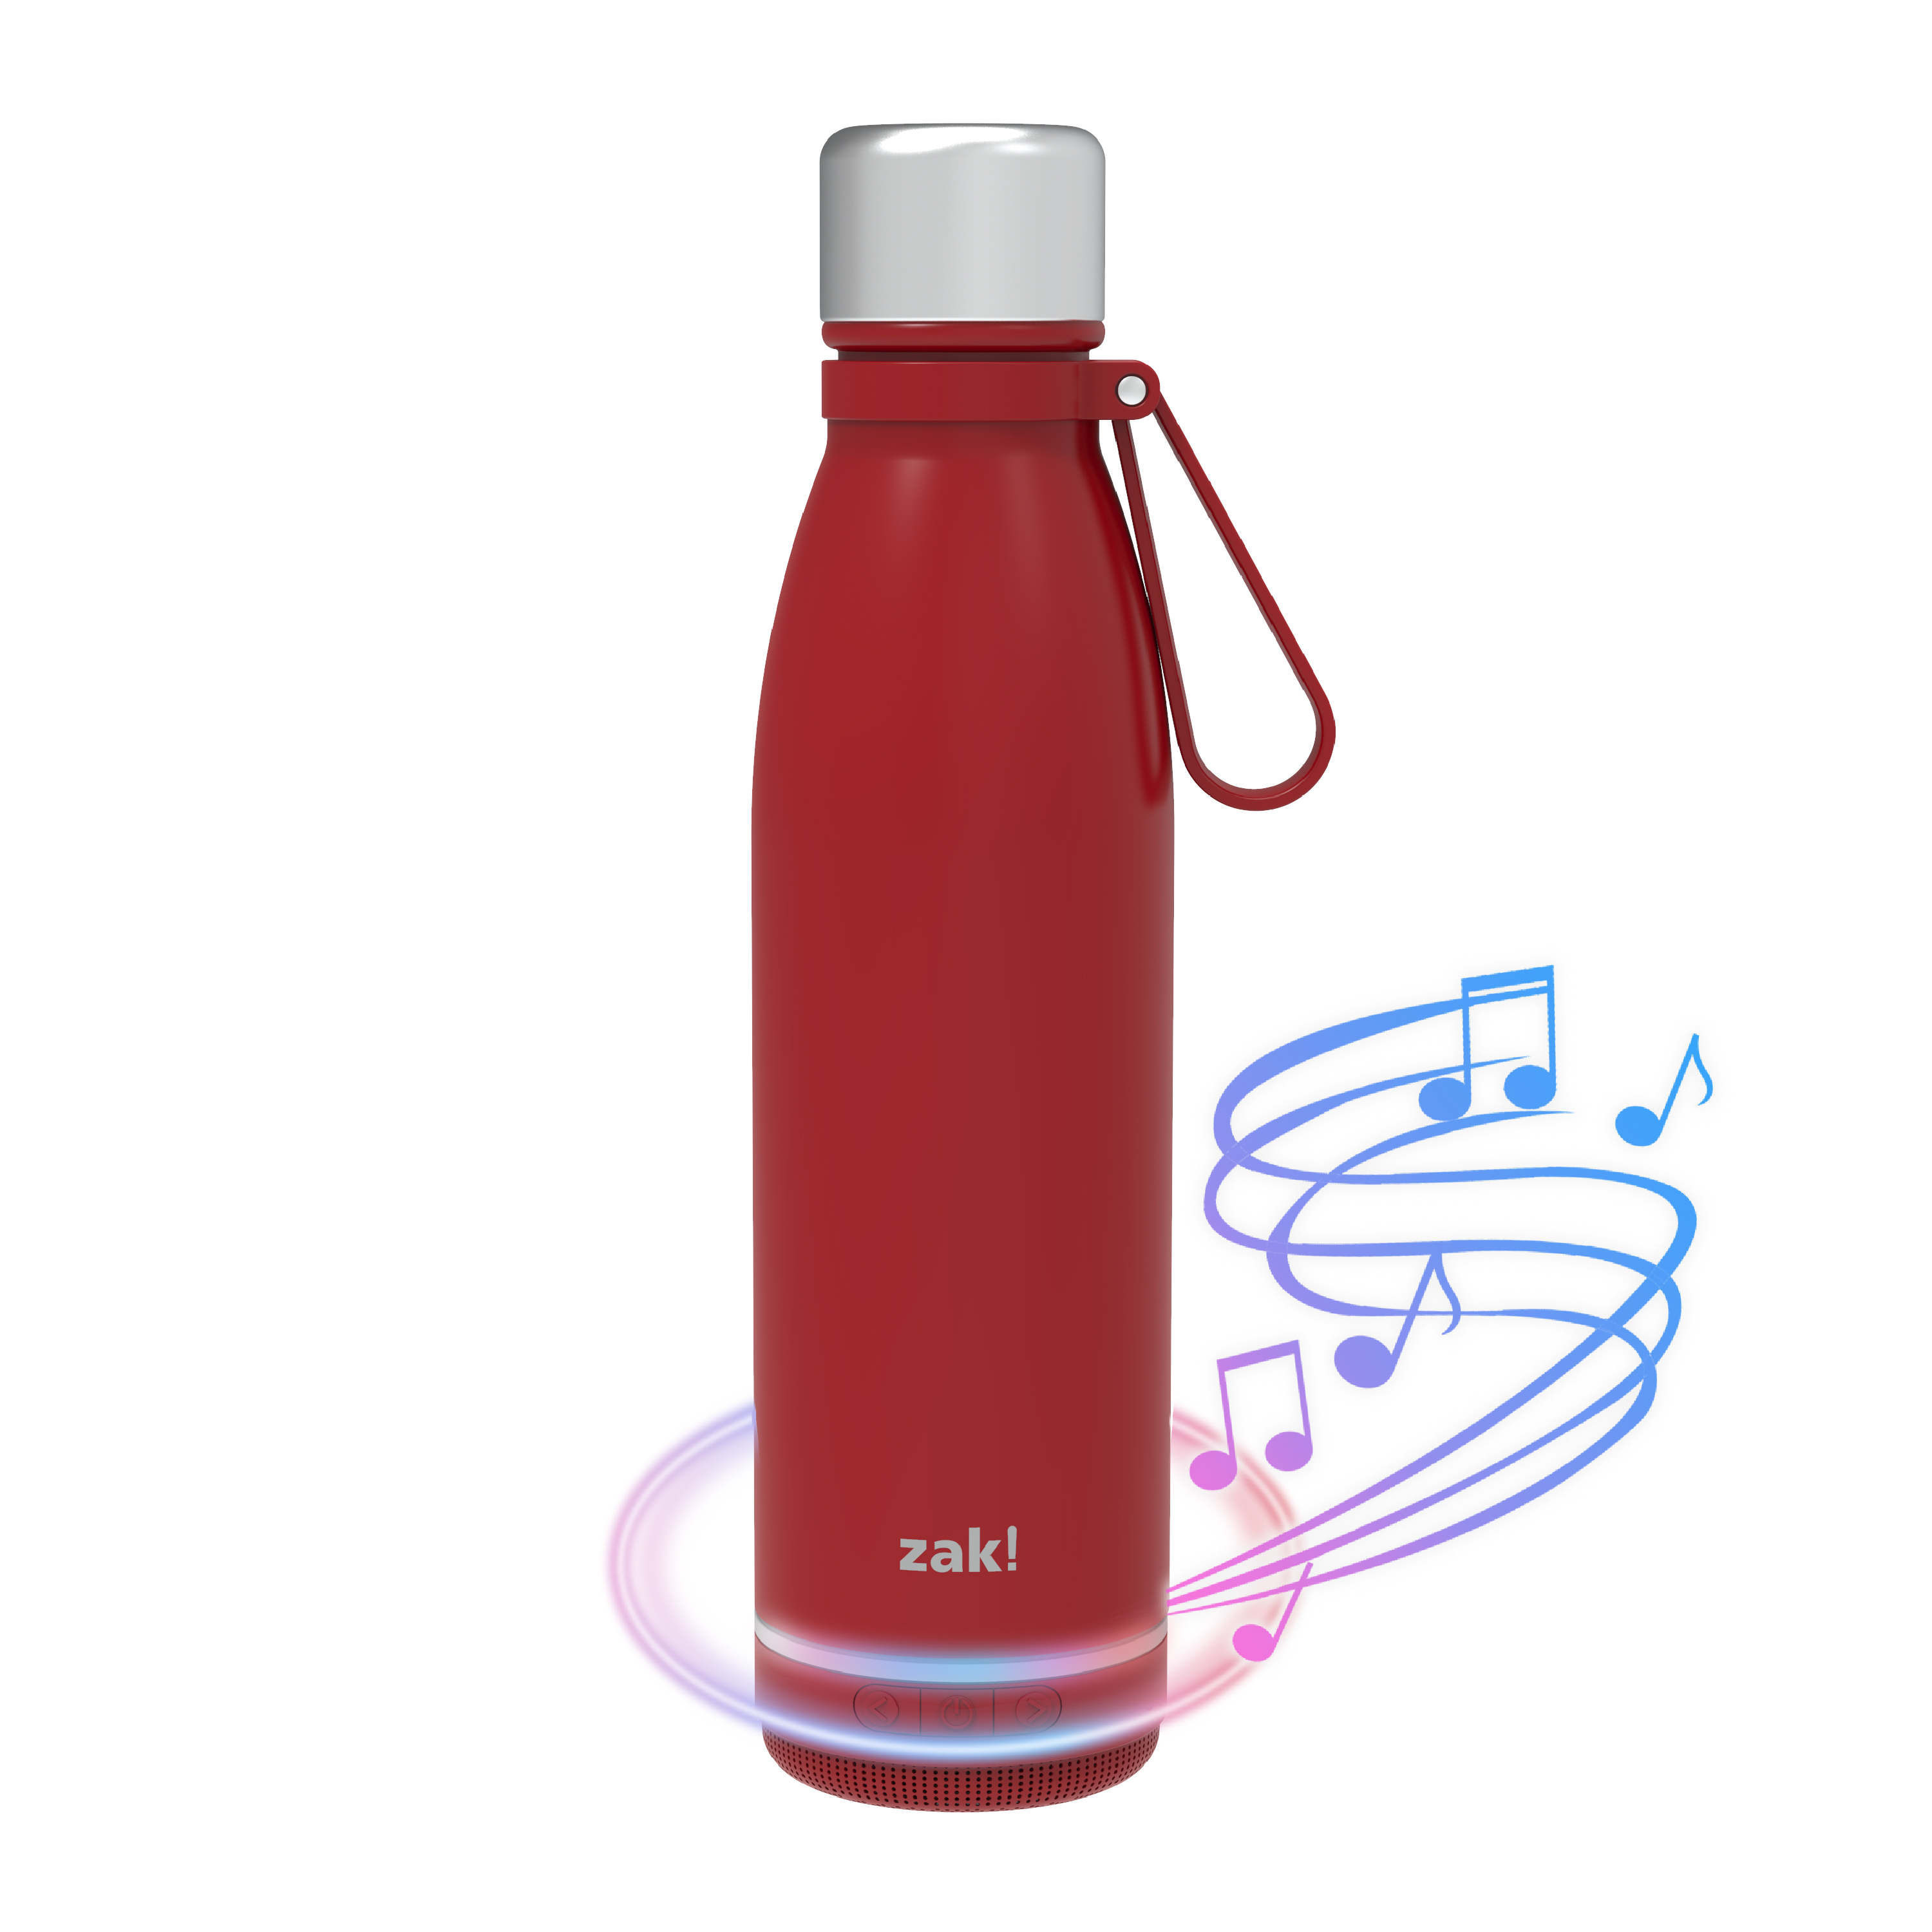 Zak Play 17.5 ounce Stainless Steel Tumbler with Bluetooth Speaker, Red slideshow image 5